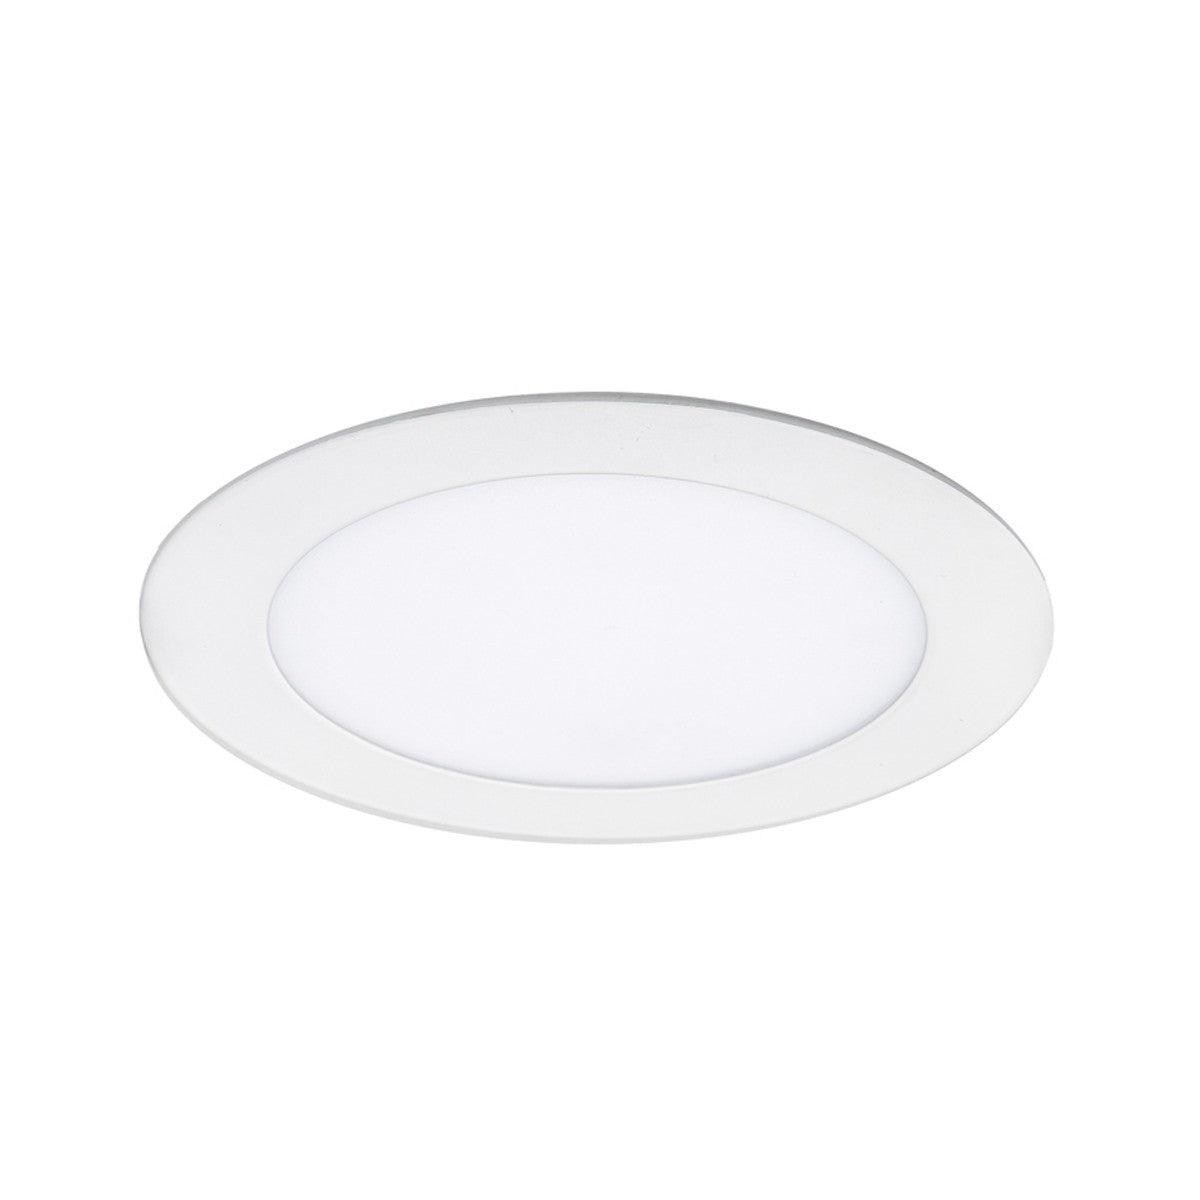 6 In. Wafer-Thin Lotos LED Canless LED Recessed Light, 12 Watt, 1200 Lumens, Selectable CCT, 2700K to 5000K, 120/277V